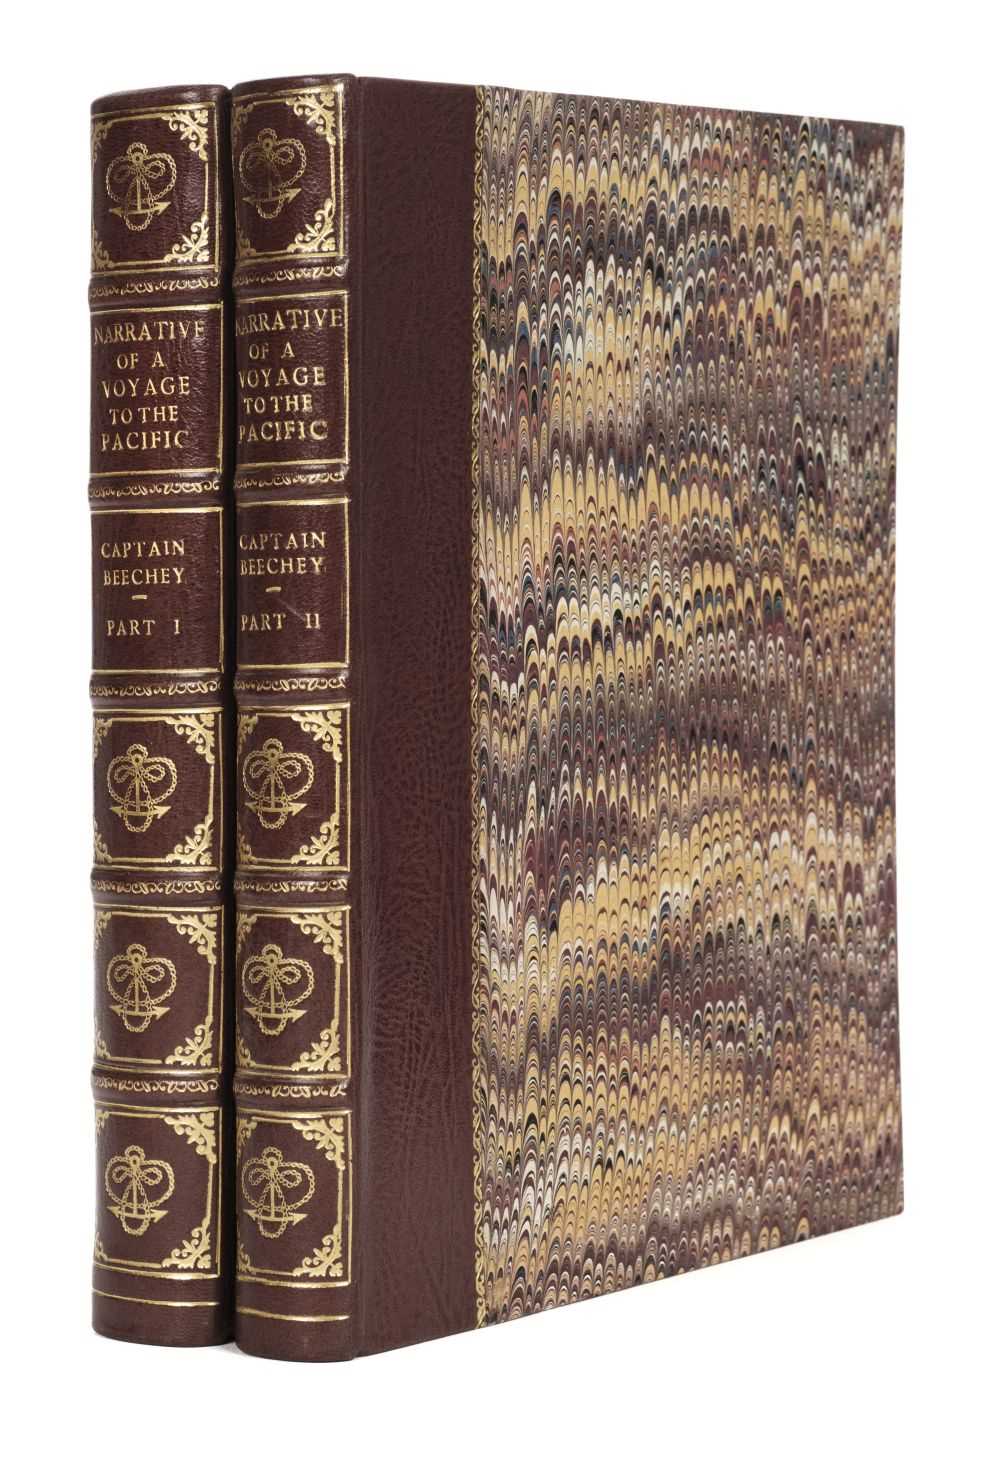 Lot 1 - Beechey (Frederick William). Narrative of a Voyage to the Pacific, 2 volumes, 1831